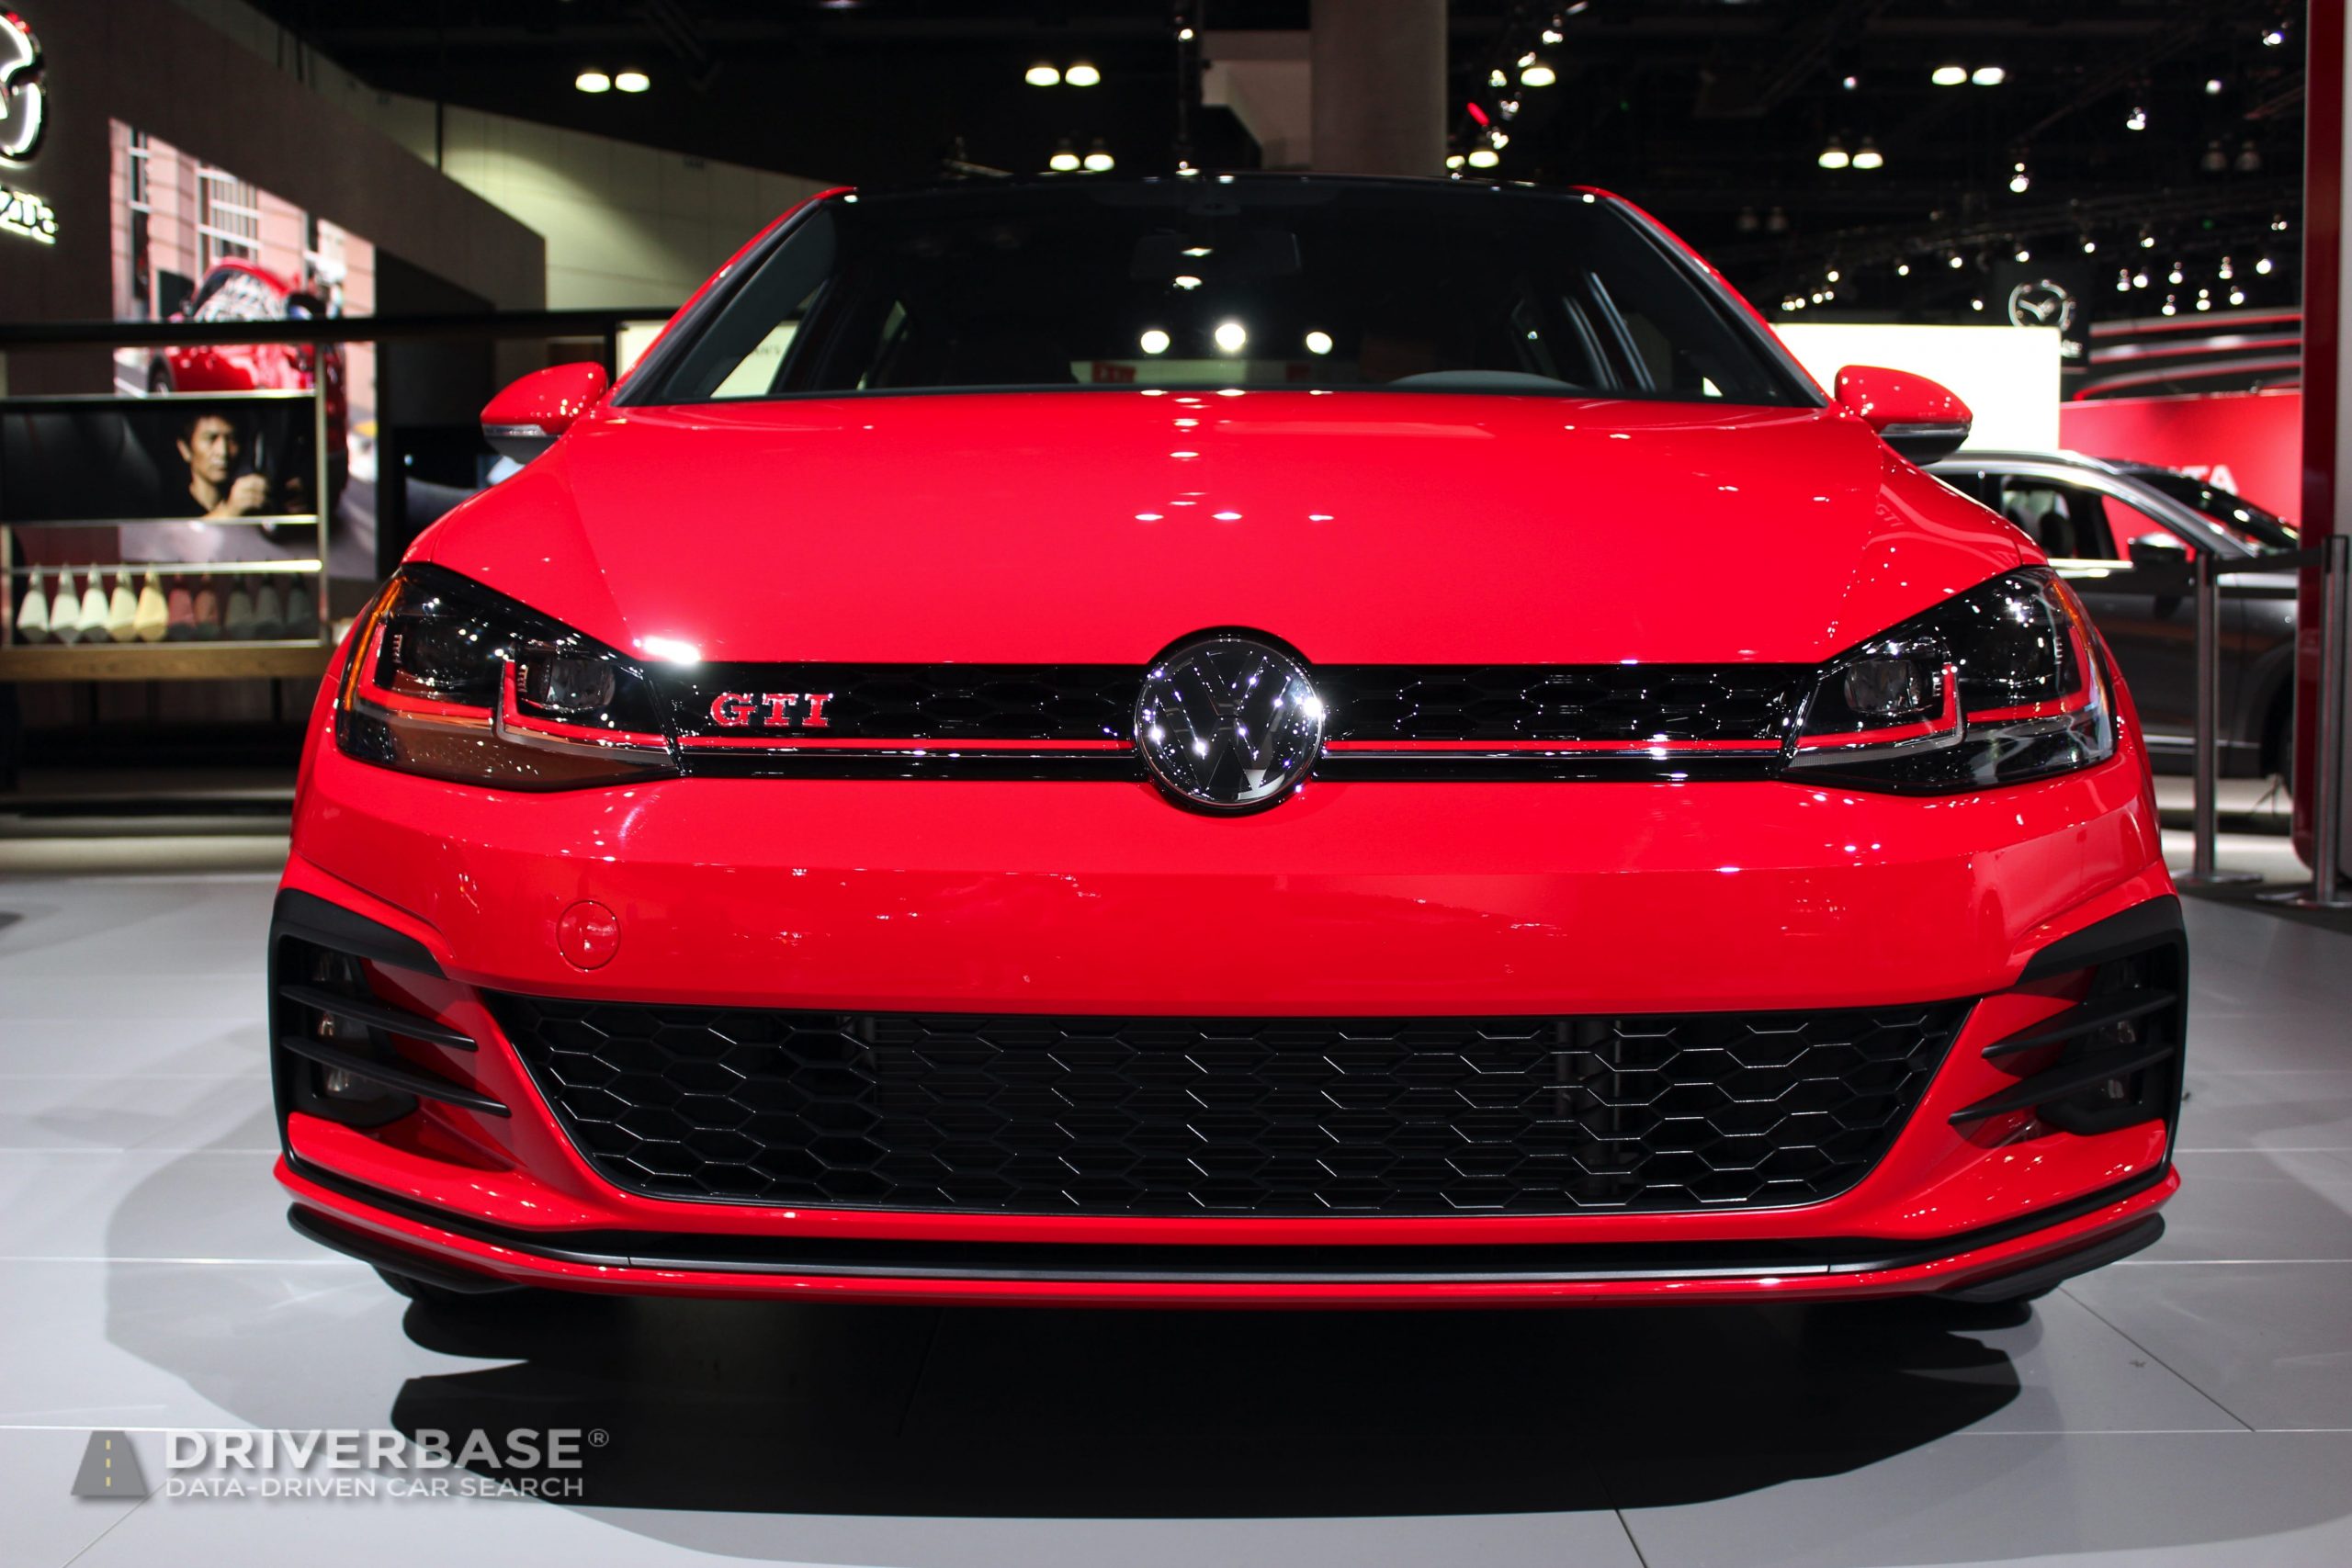 2020 Volkswagen Golf GTI Autobahn at the 2019 Los Angeles Auto Show